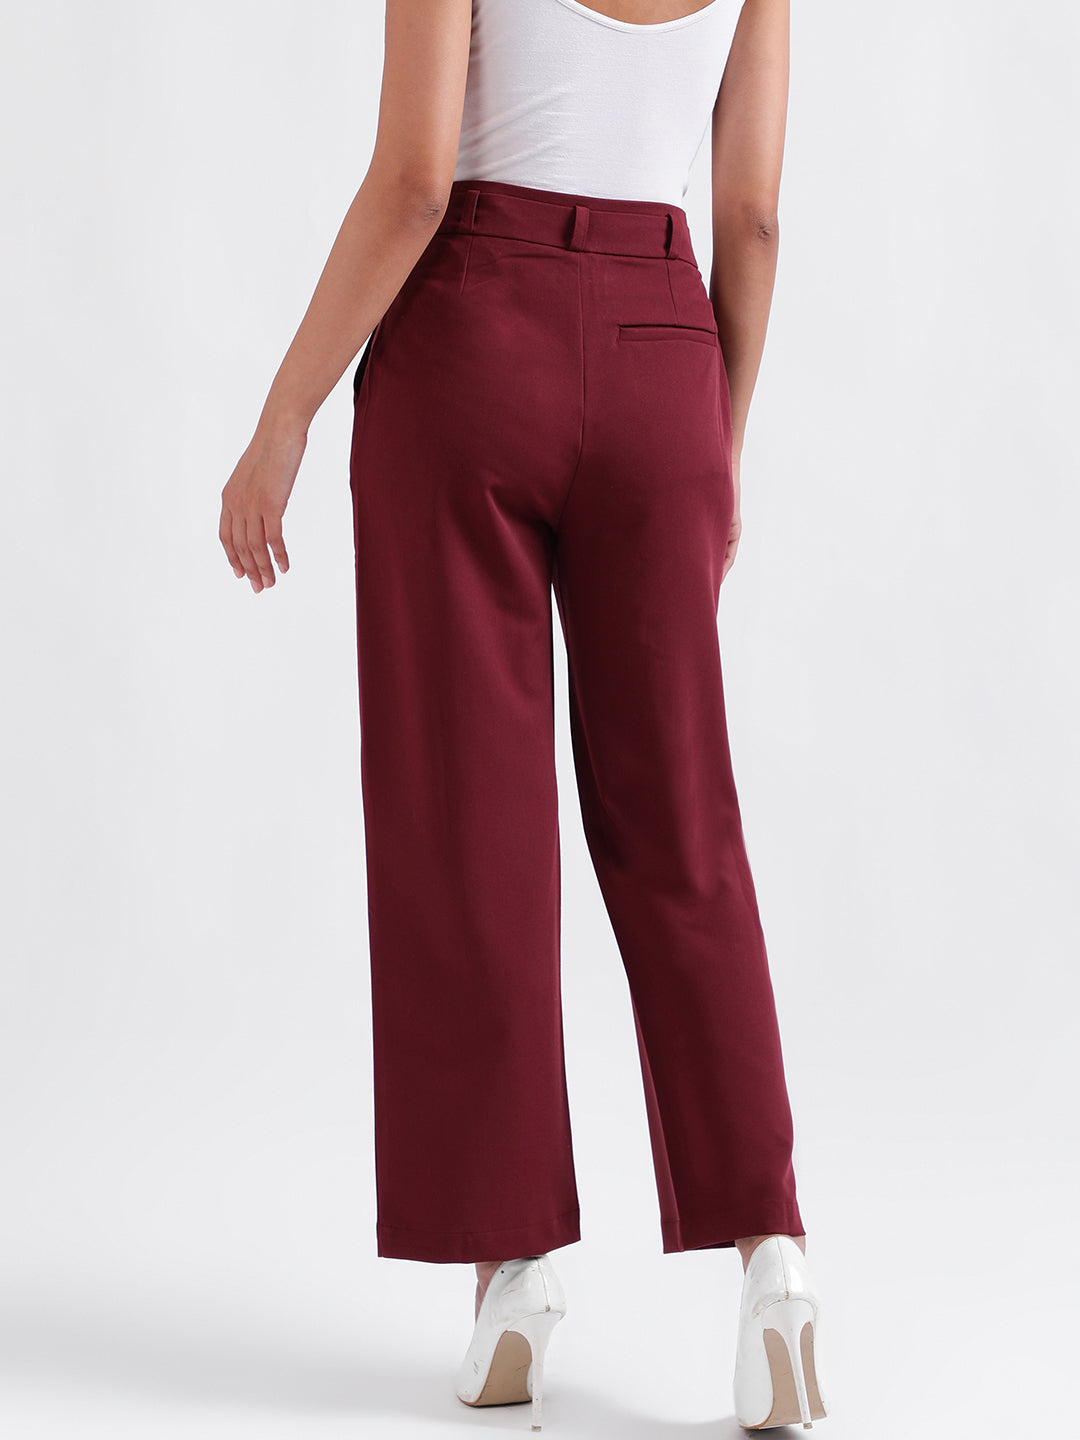 Iconic Women Maroon Solid Regular Fit Trouser